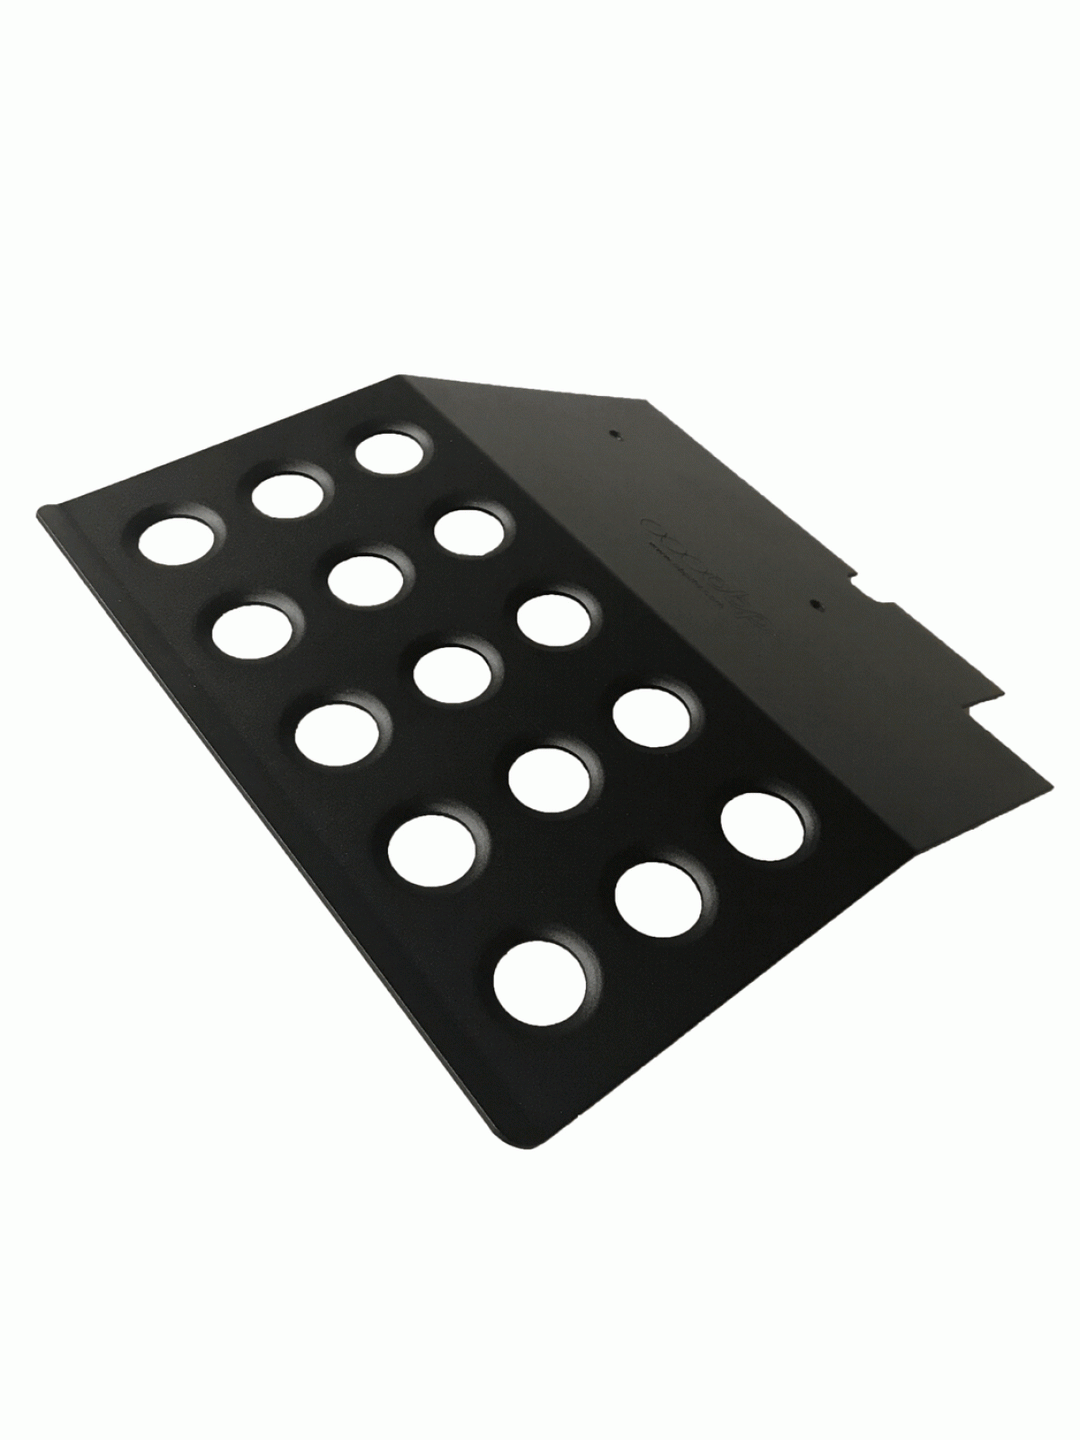 obp Motorsport Dark Matter Master Cylinder Cover Plate - Attacking the Clock Racing